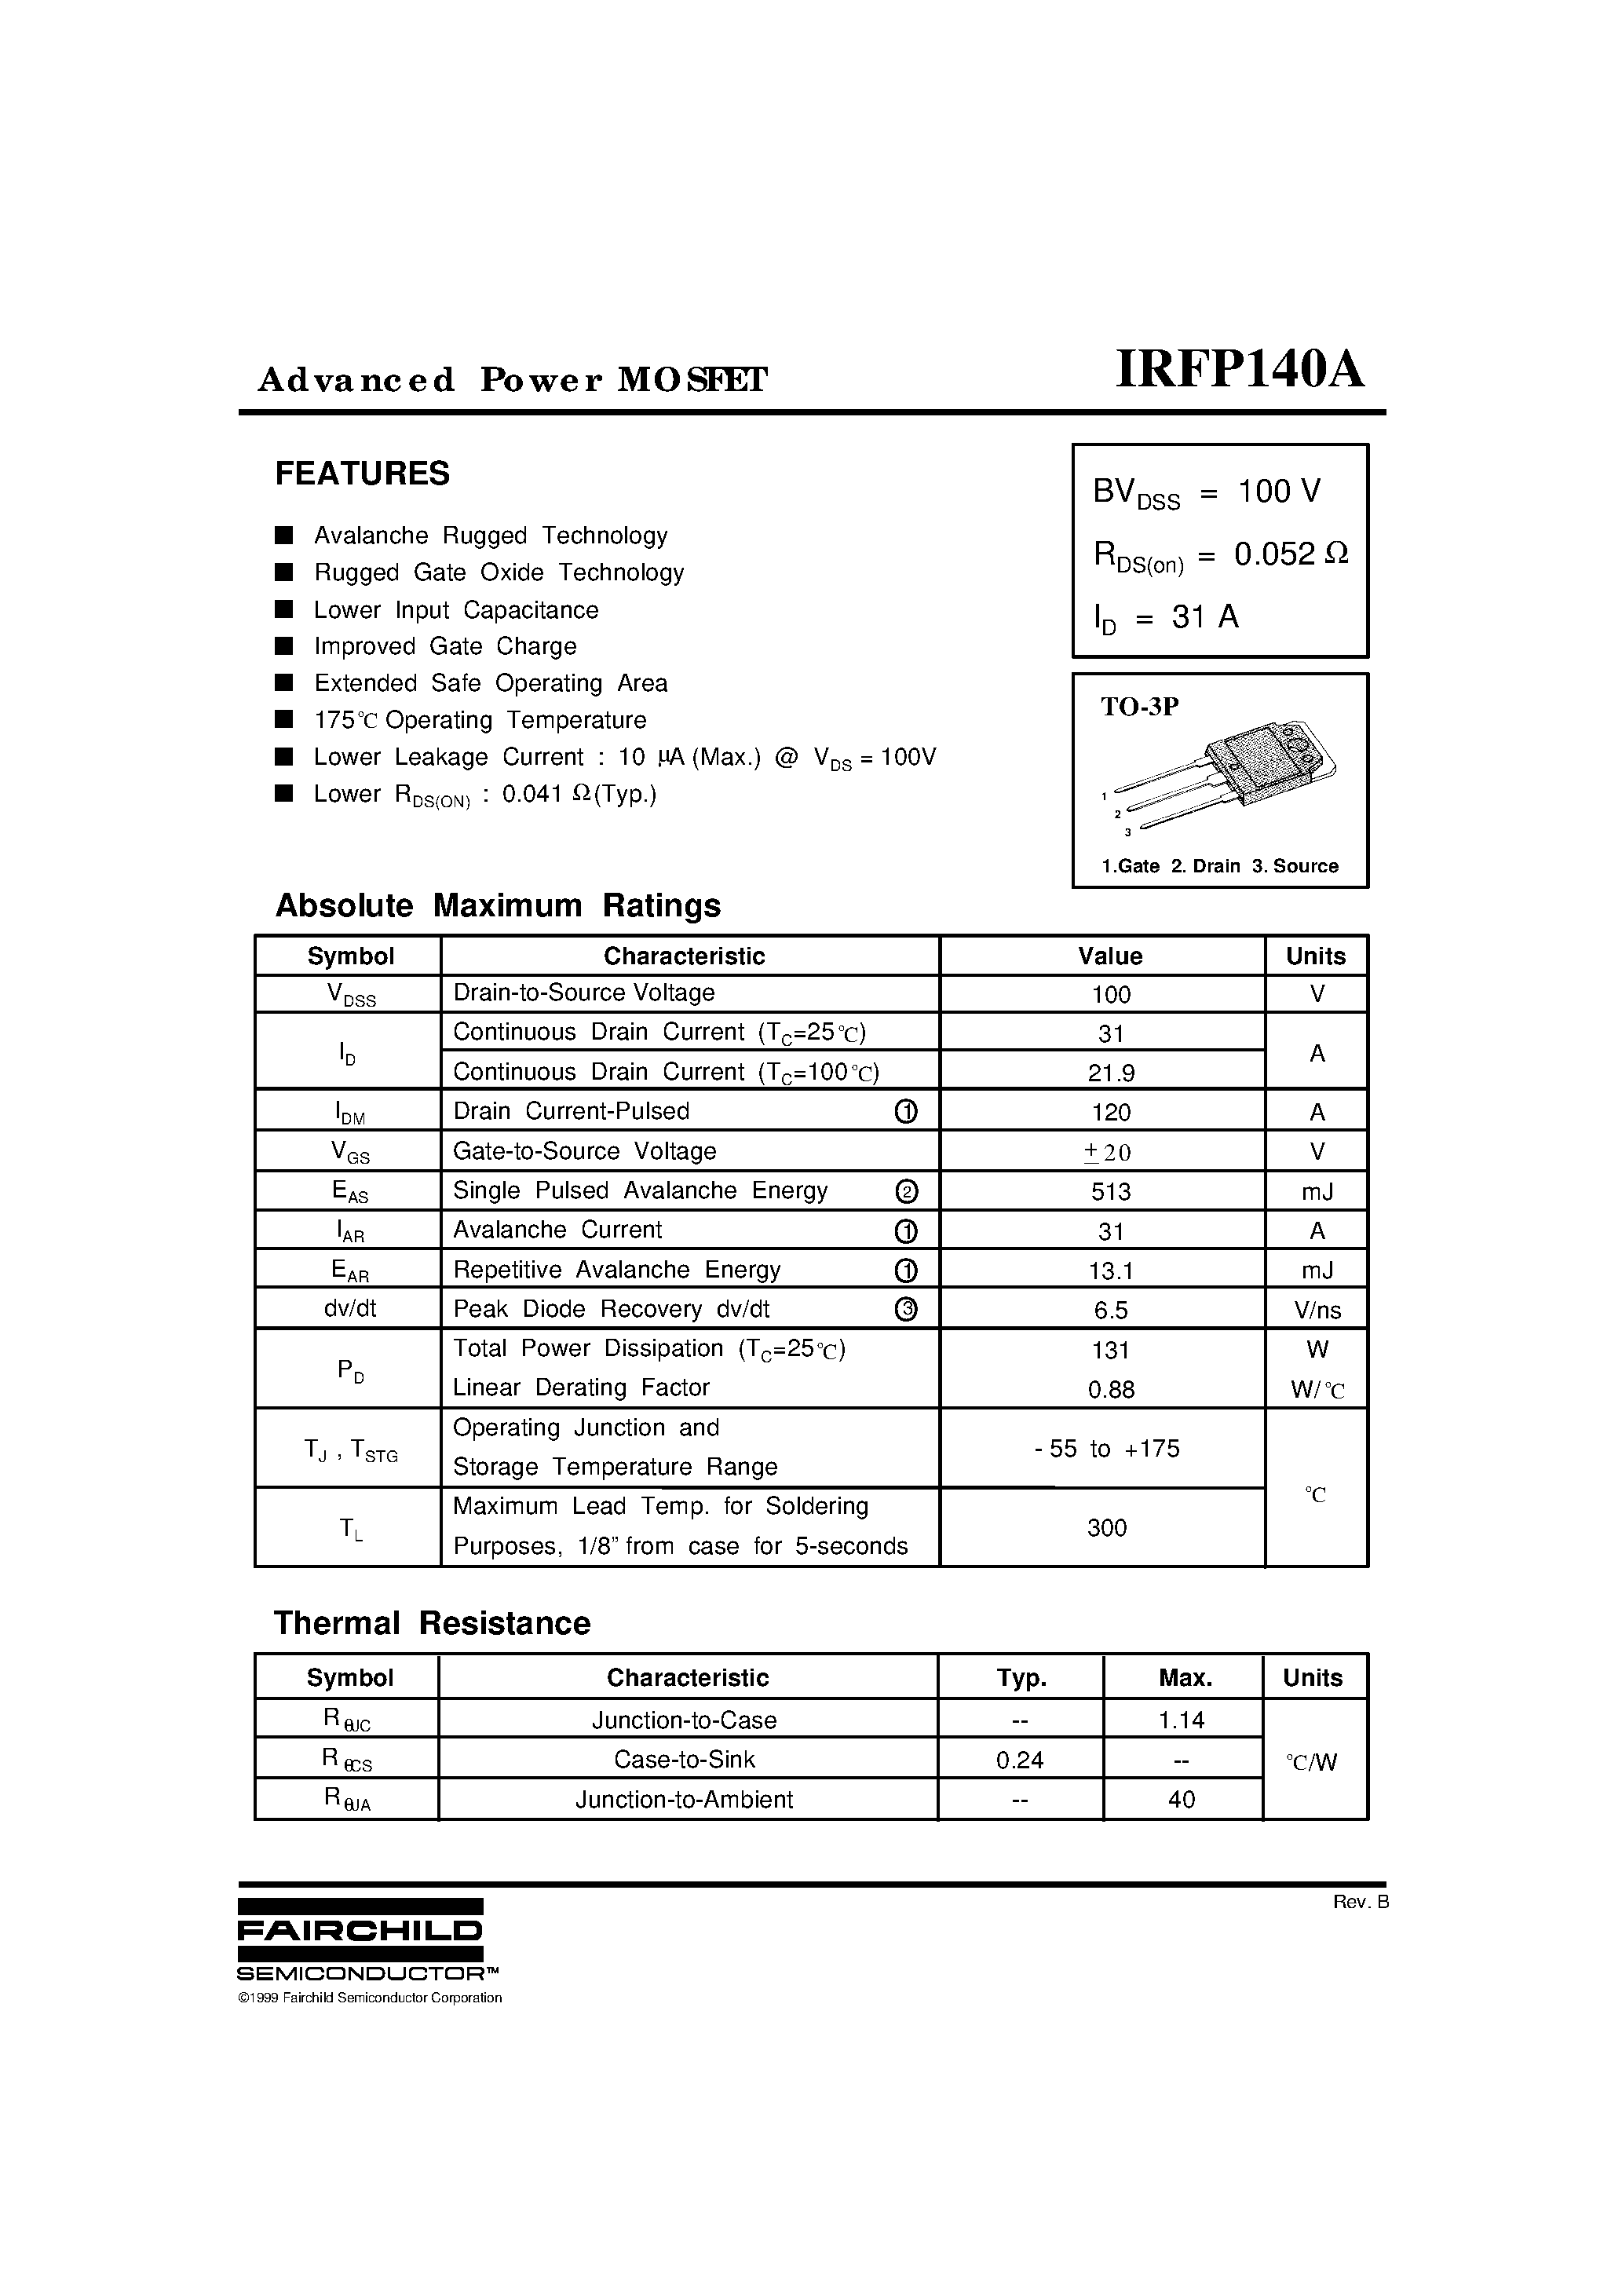 Datasheet IRFP140A - Advanced Power MOSFET page 1